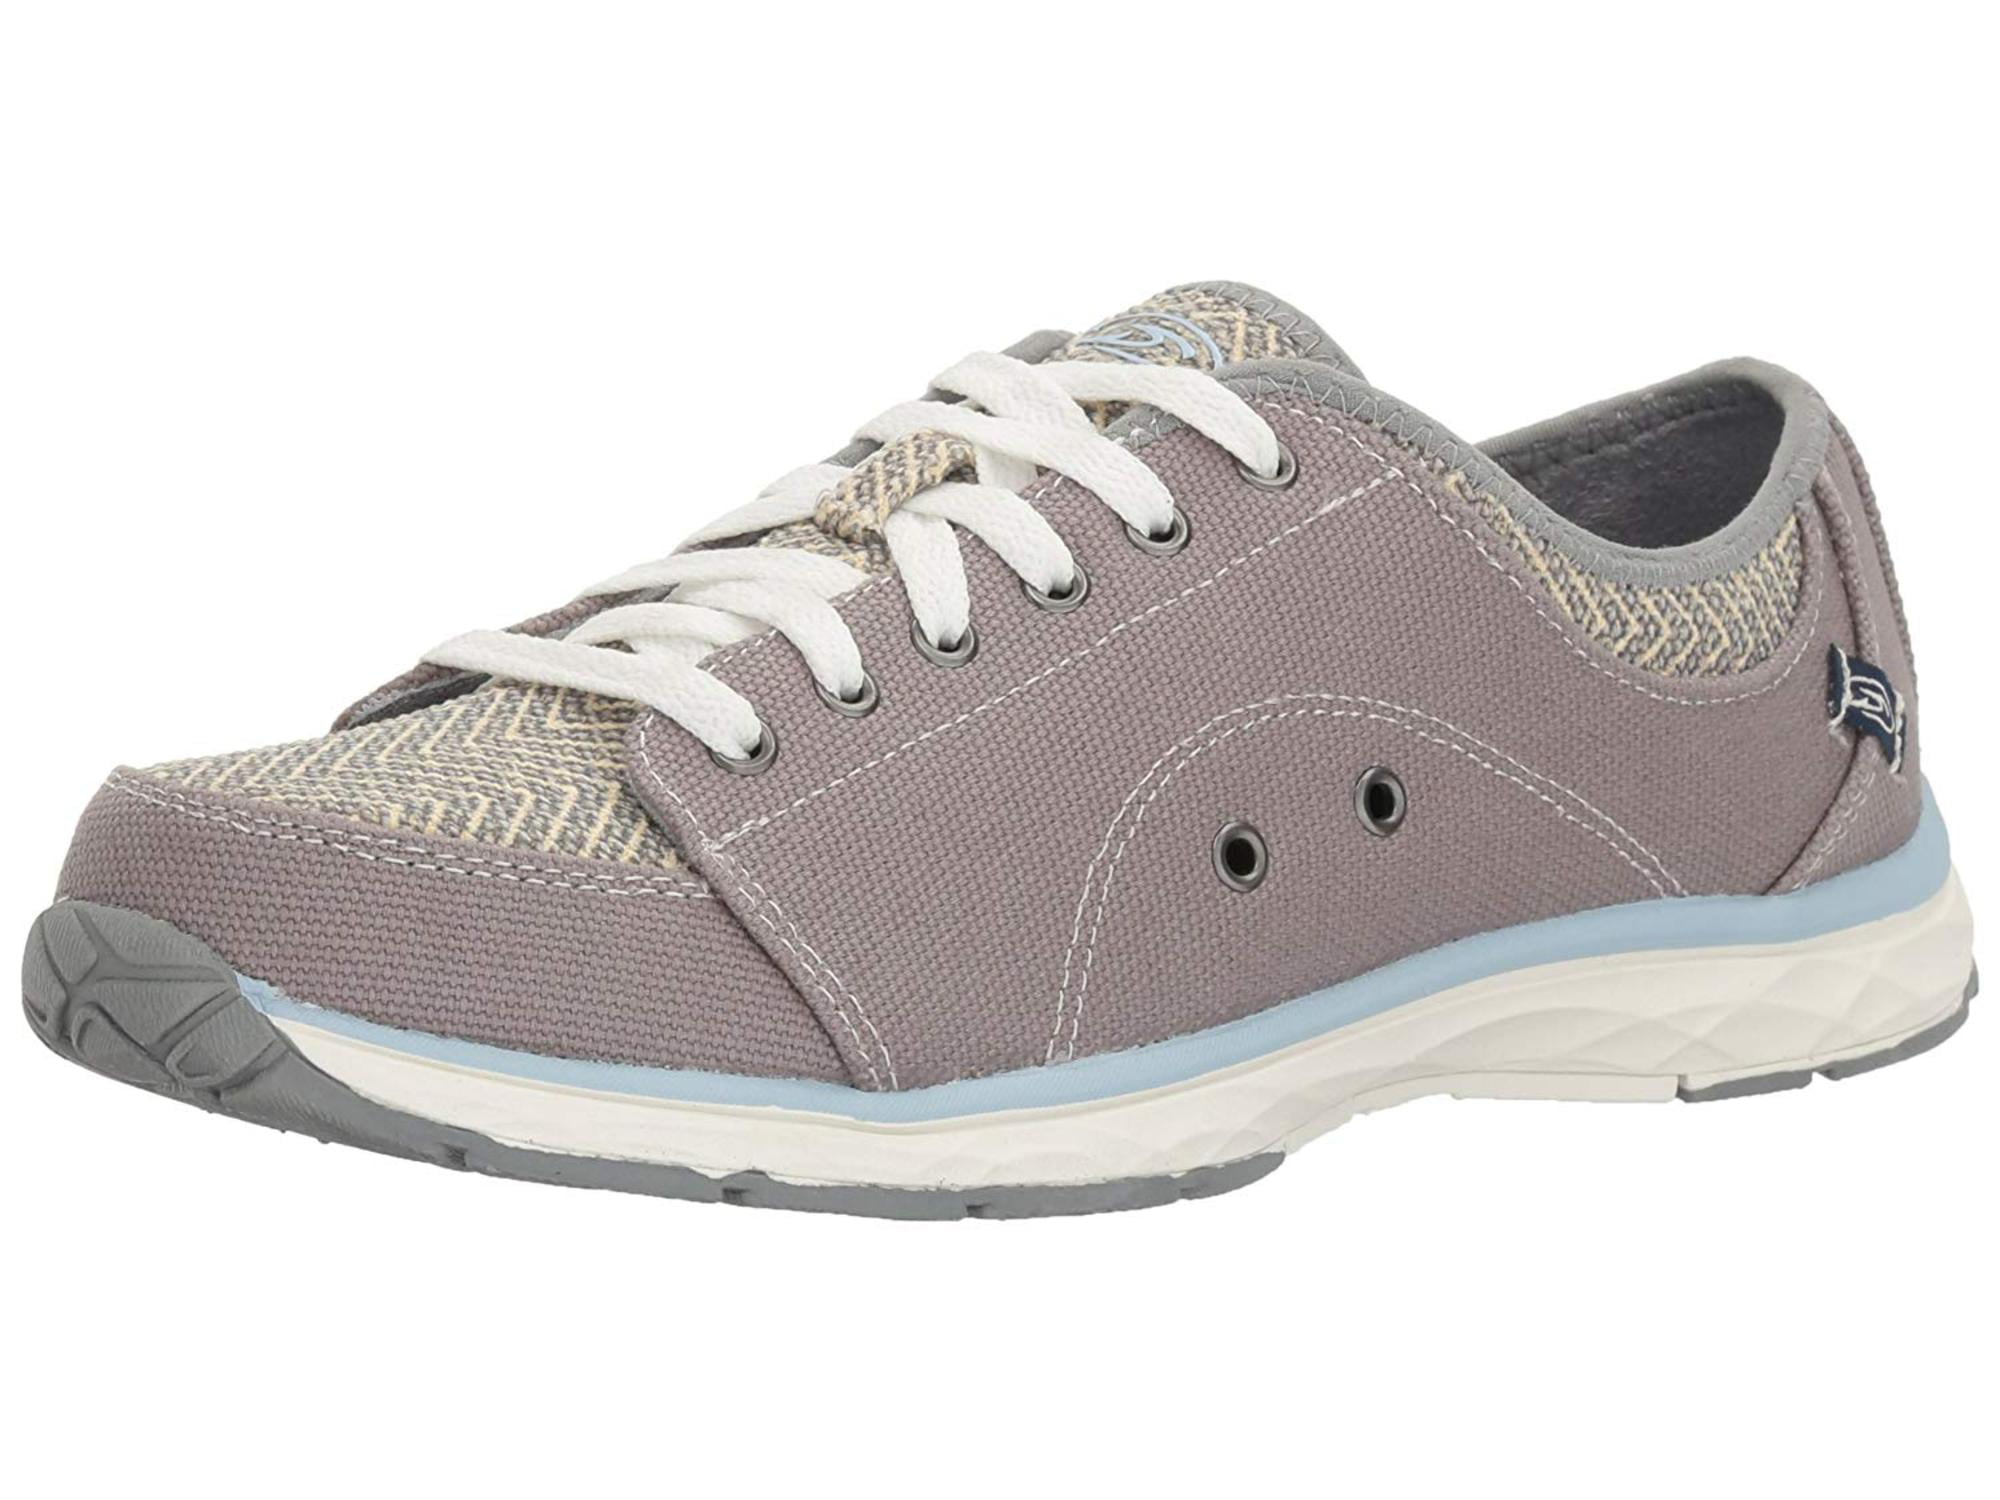 Dr. Scholl's Womens Anna Low Top Lace Up Fashion Sneakers - Walmart.com